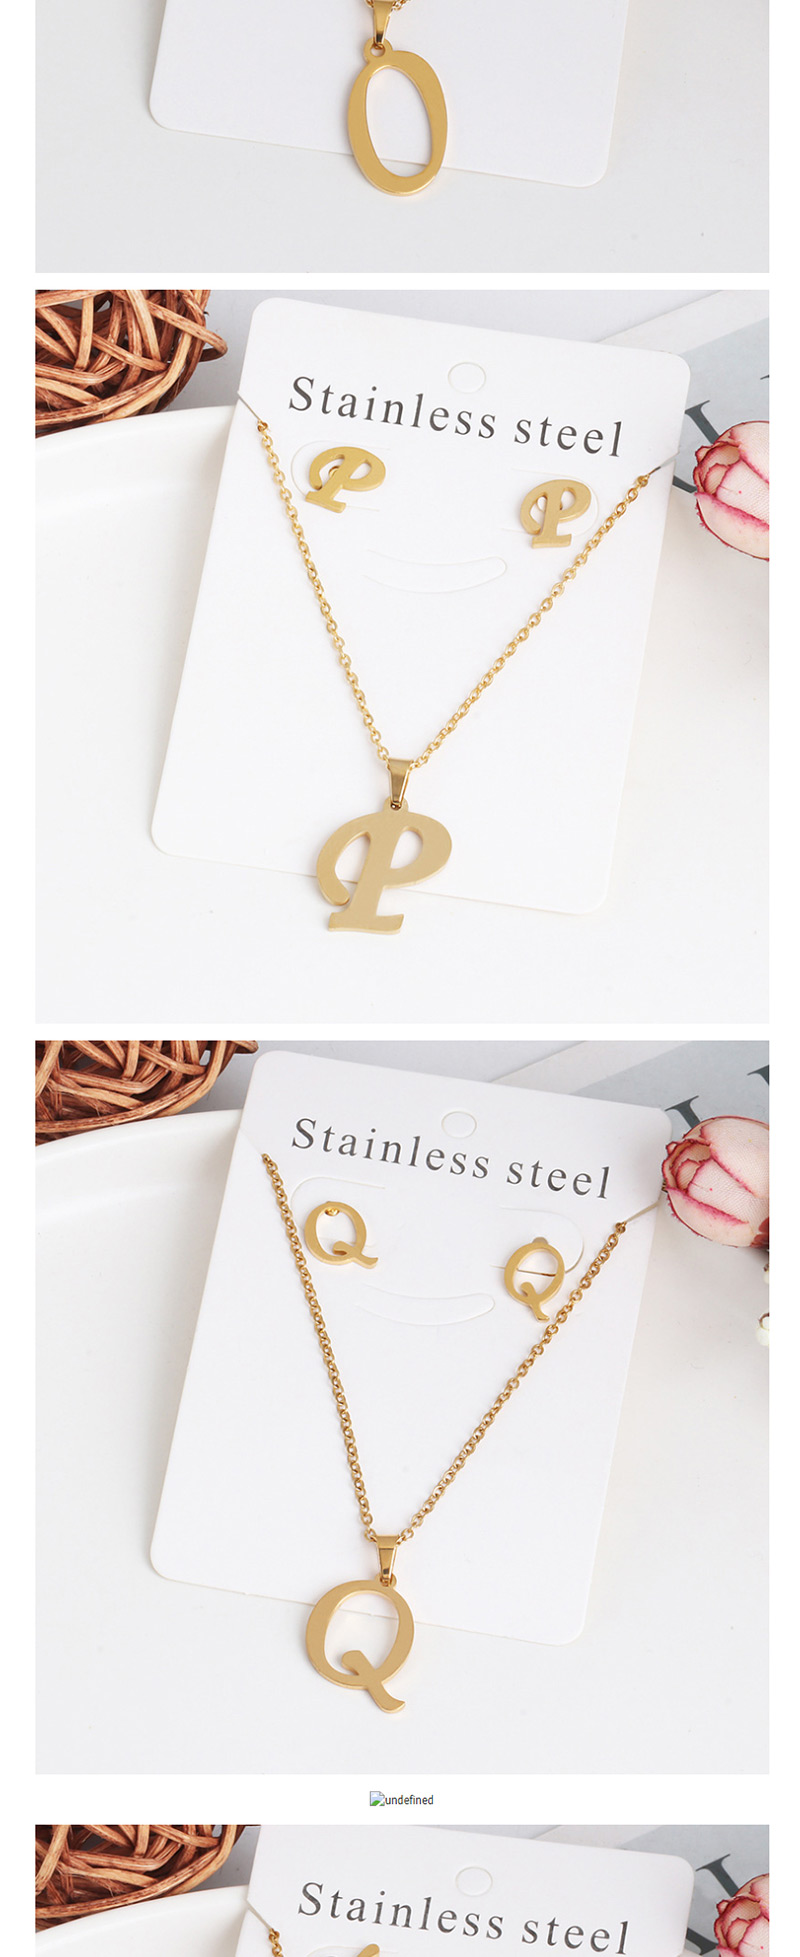 Fashion B Gold Stainless Steel Letter Necklace Earrings Two-piece,Jewelry Sets